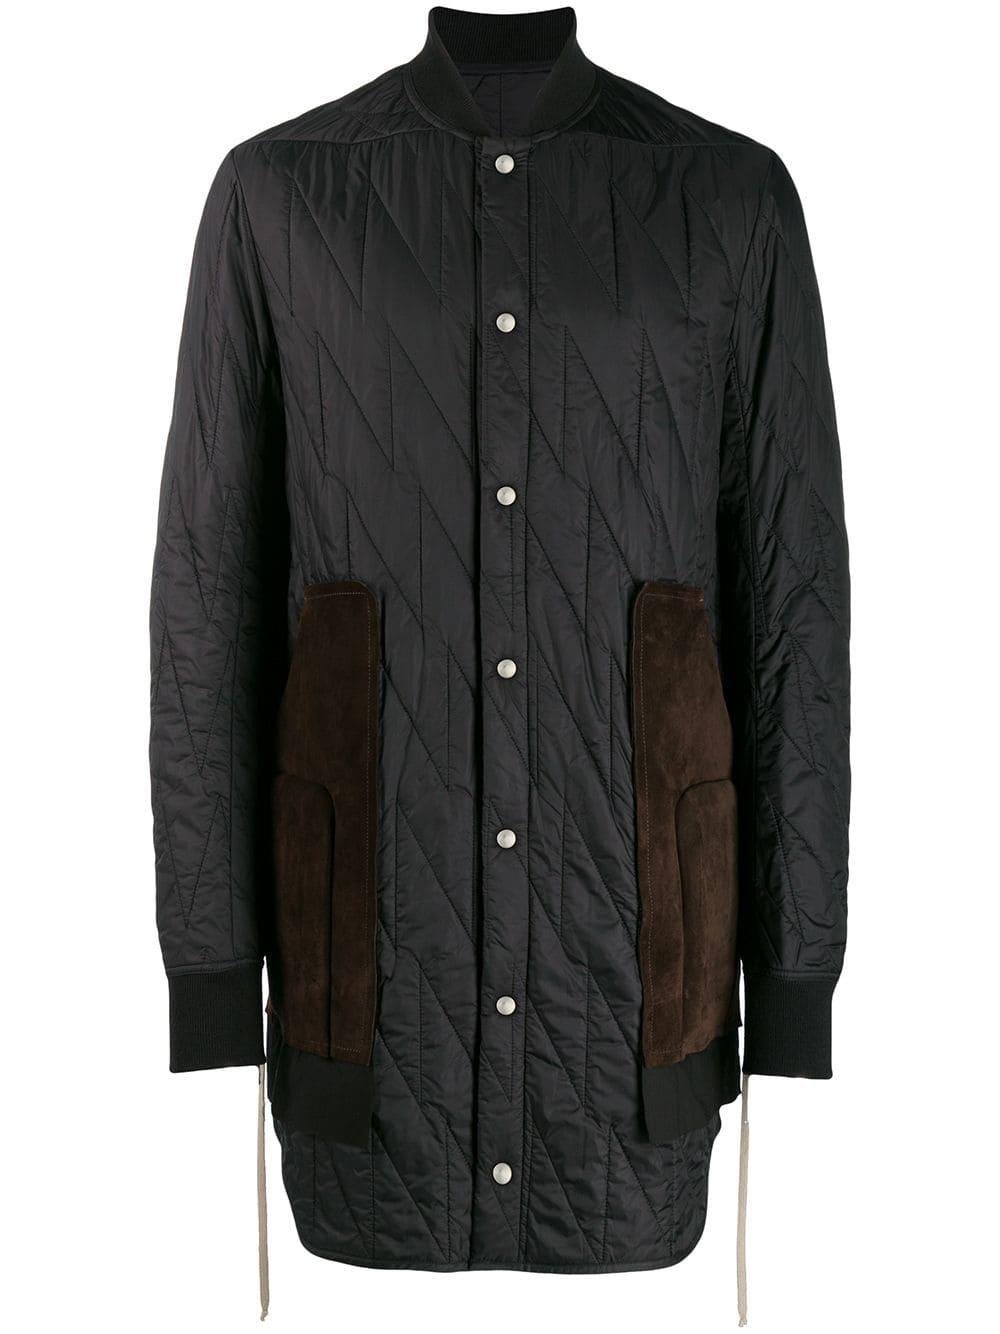 quilted duffle coat by RICK OWENS